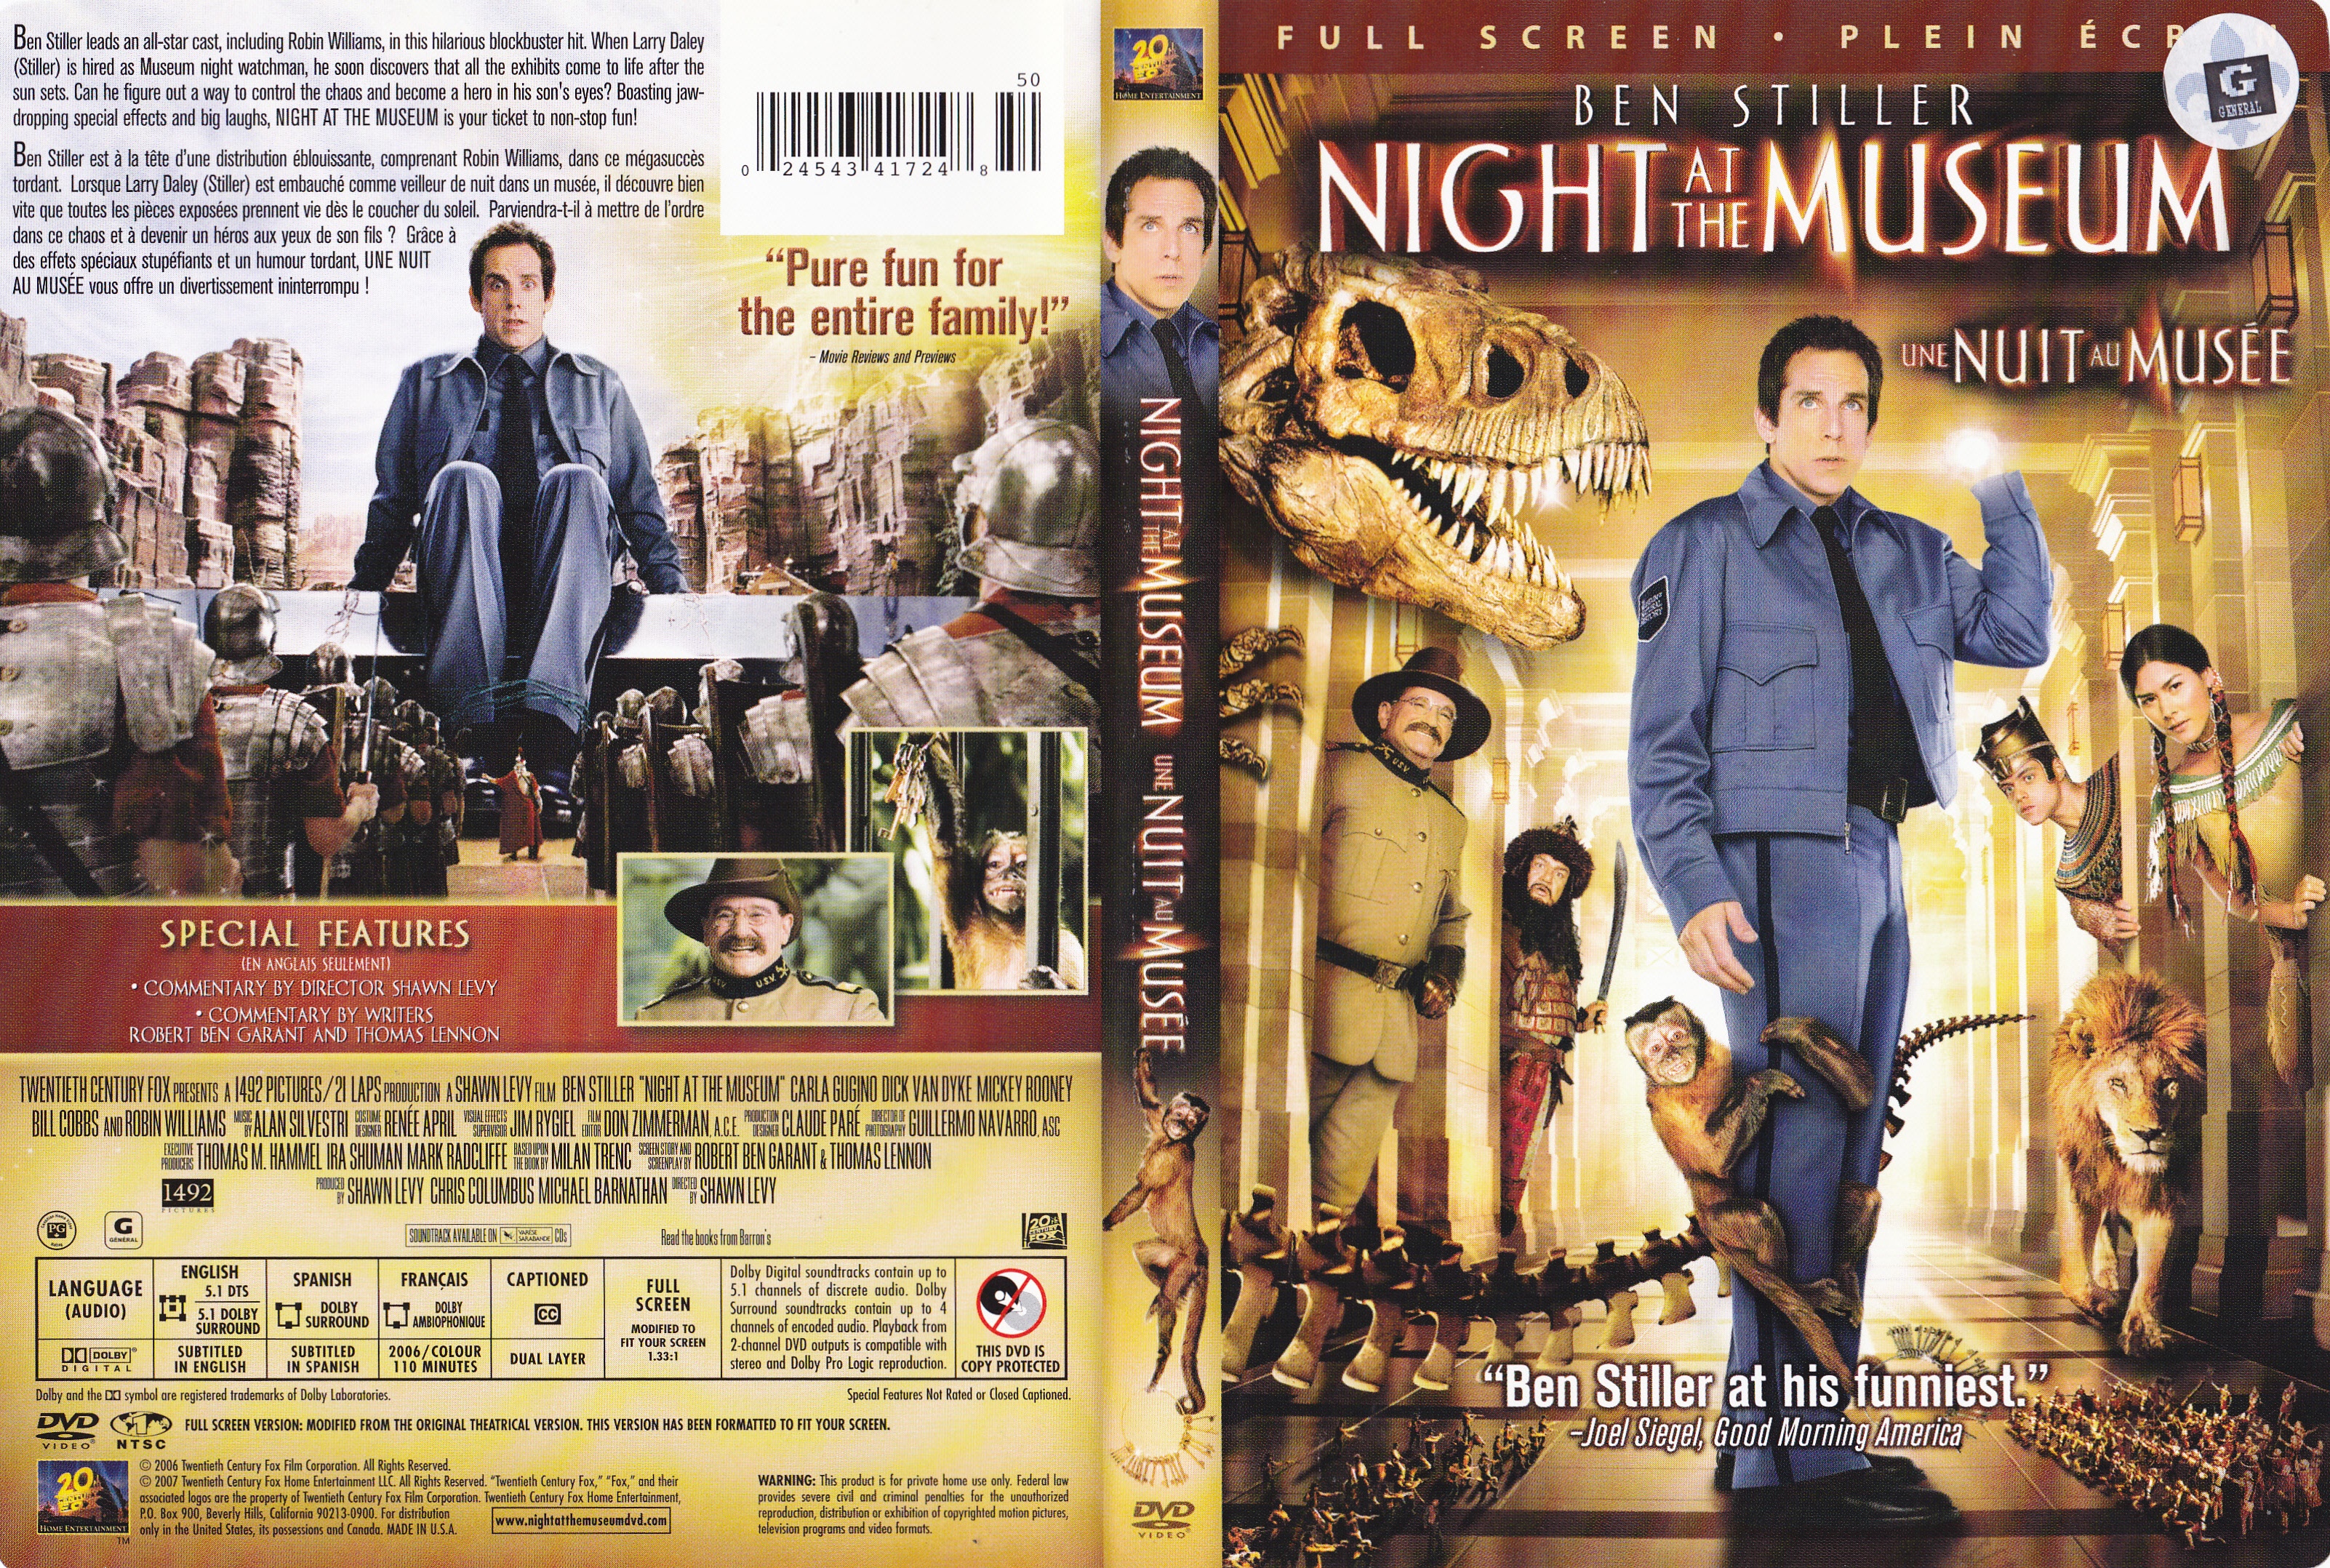 Jaquette DVD Night at museum - Une nuit au muse (Canadienne)